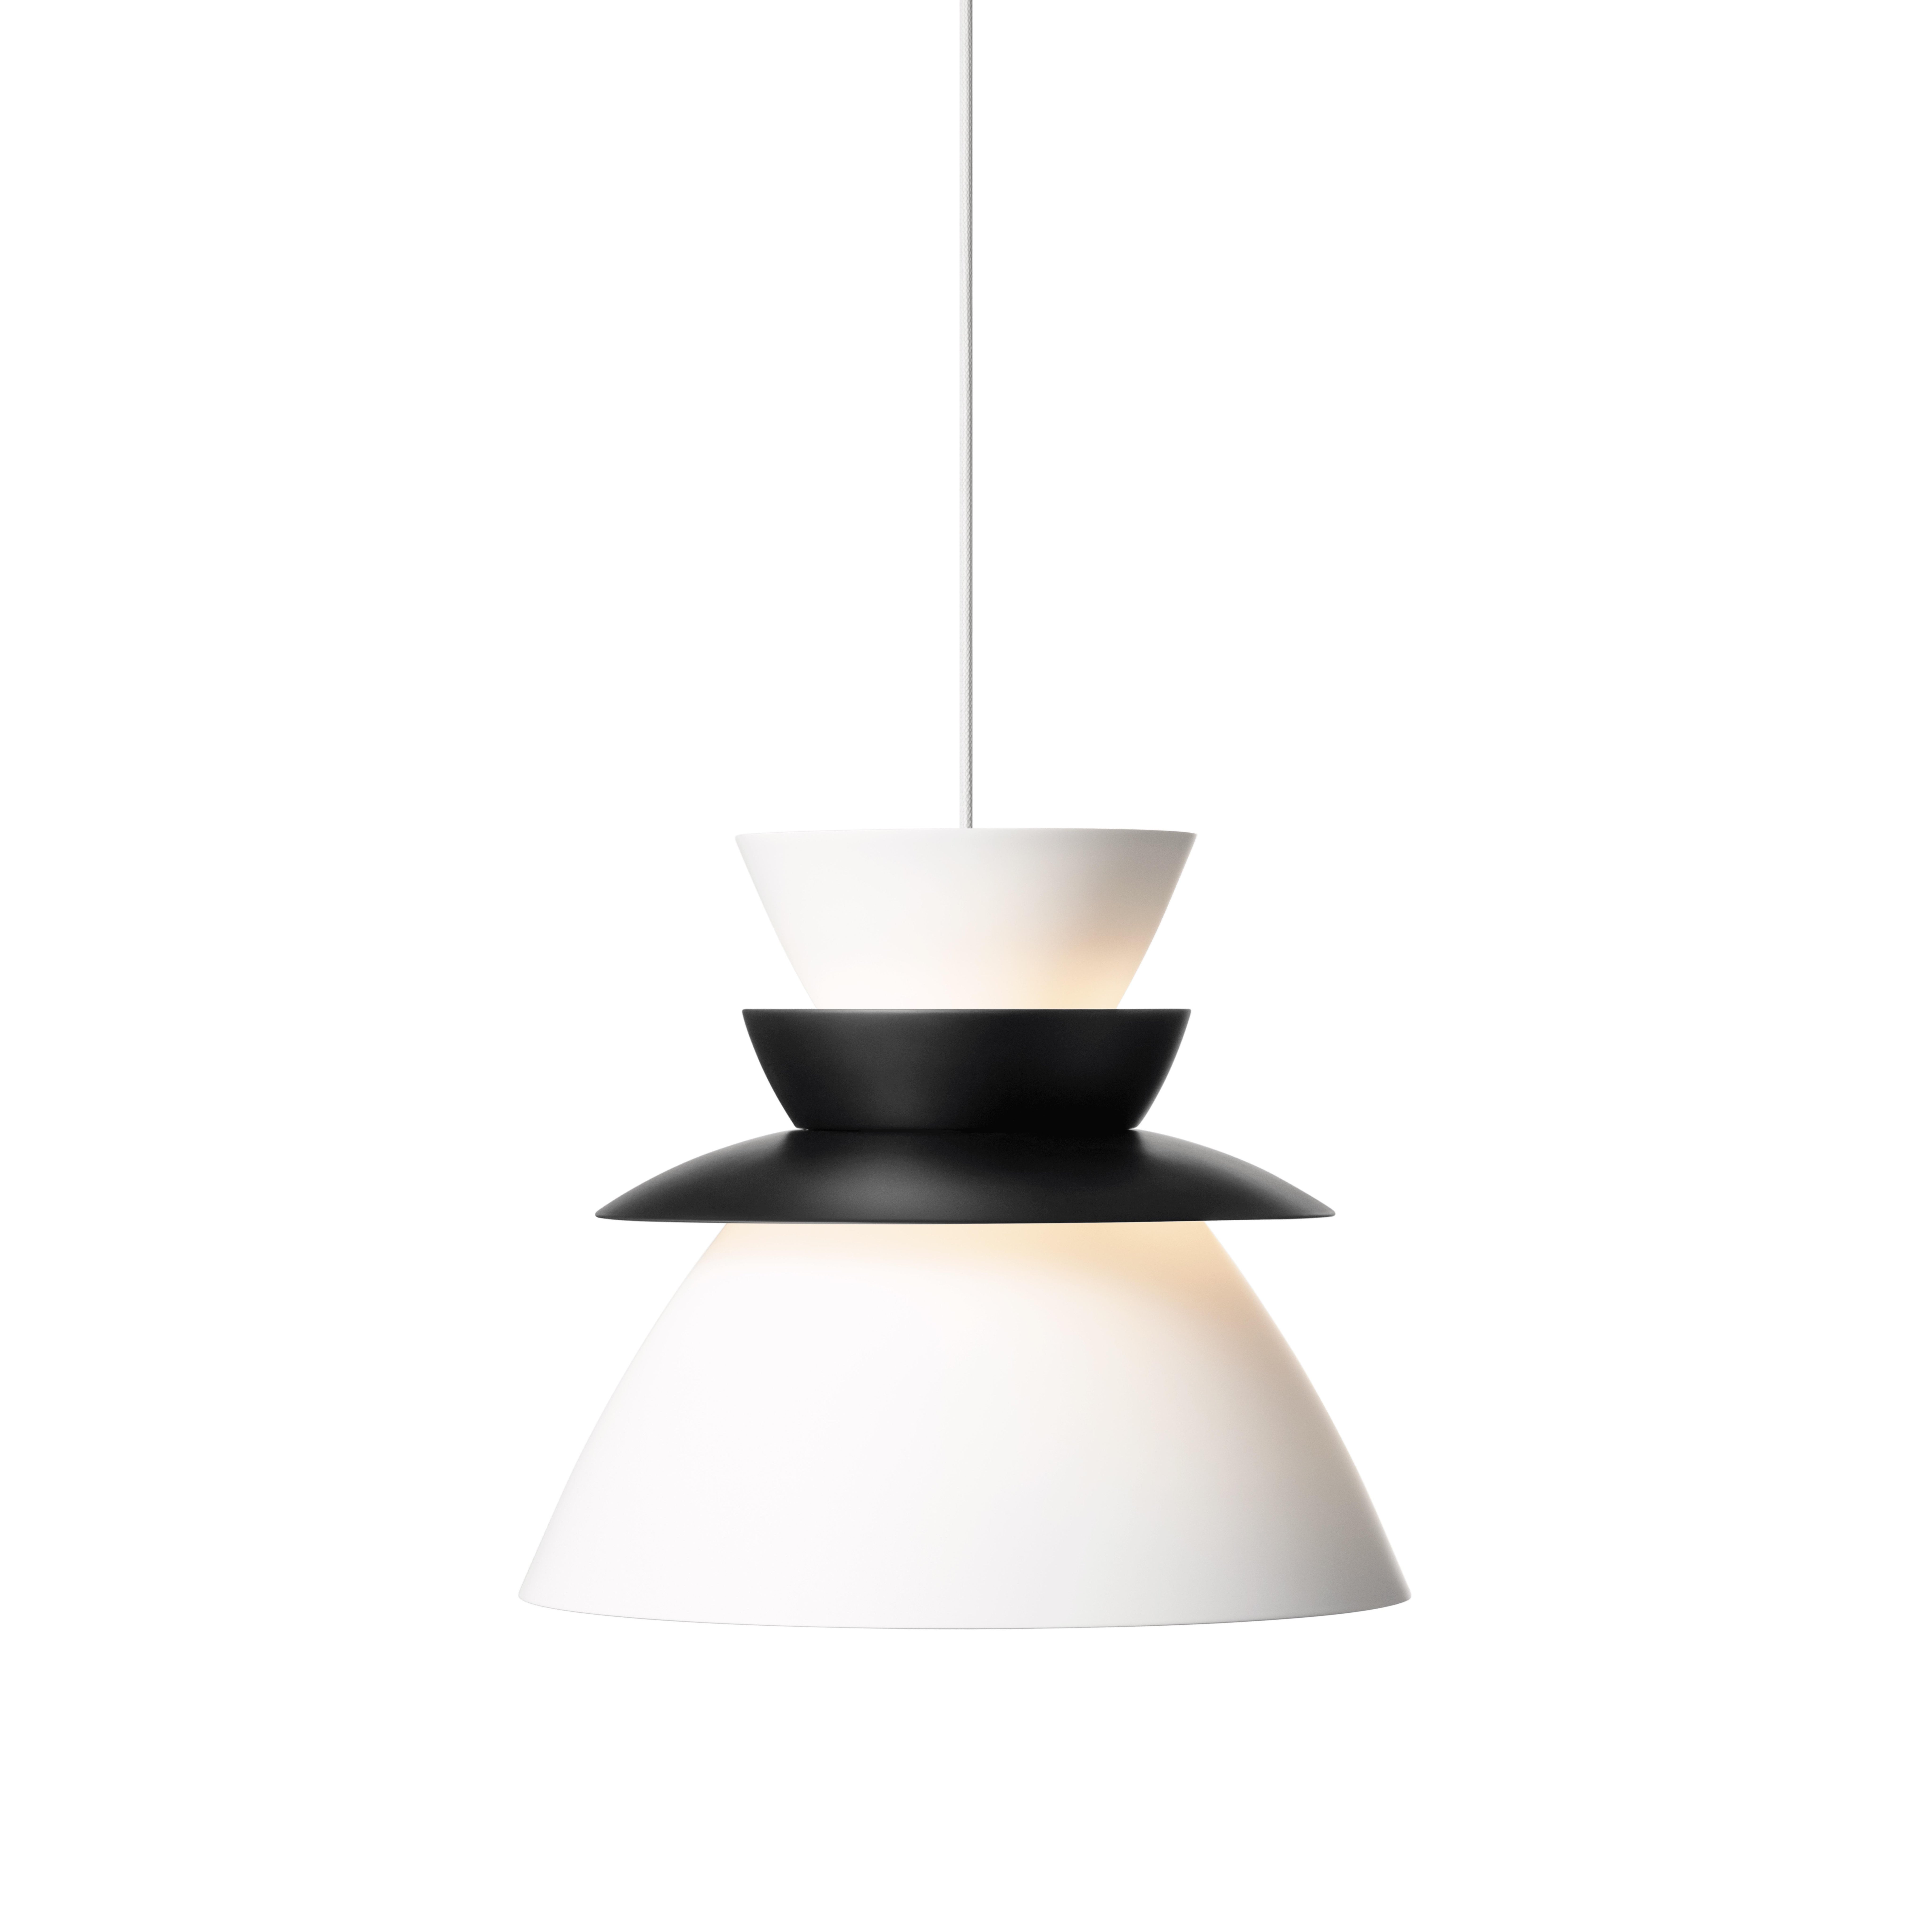 Painted Contemporary Pendant Lamp 'Sundowner 400' by Lyfa, Black For Sale